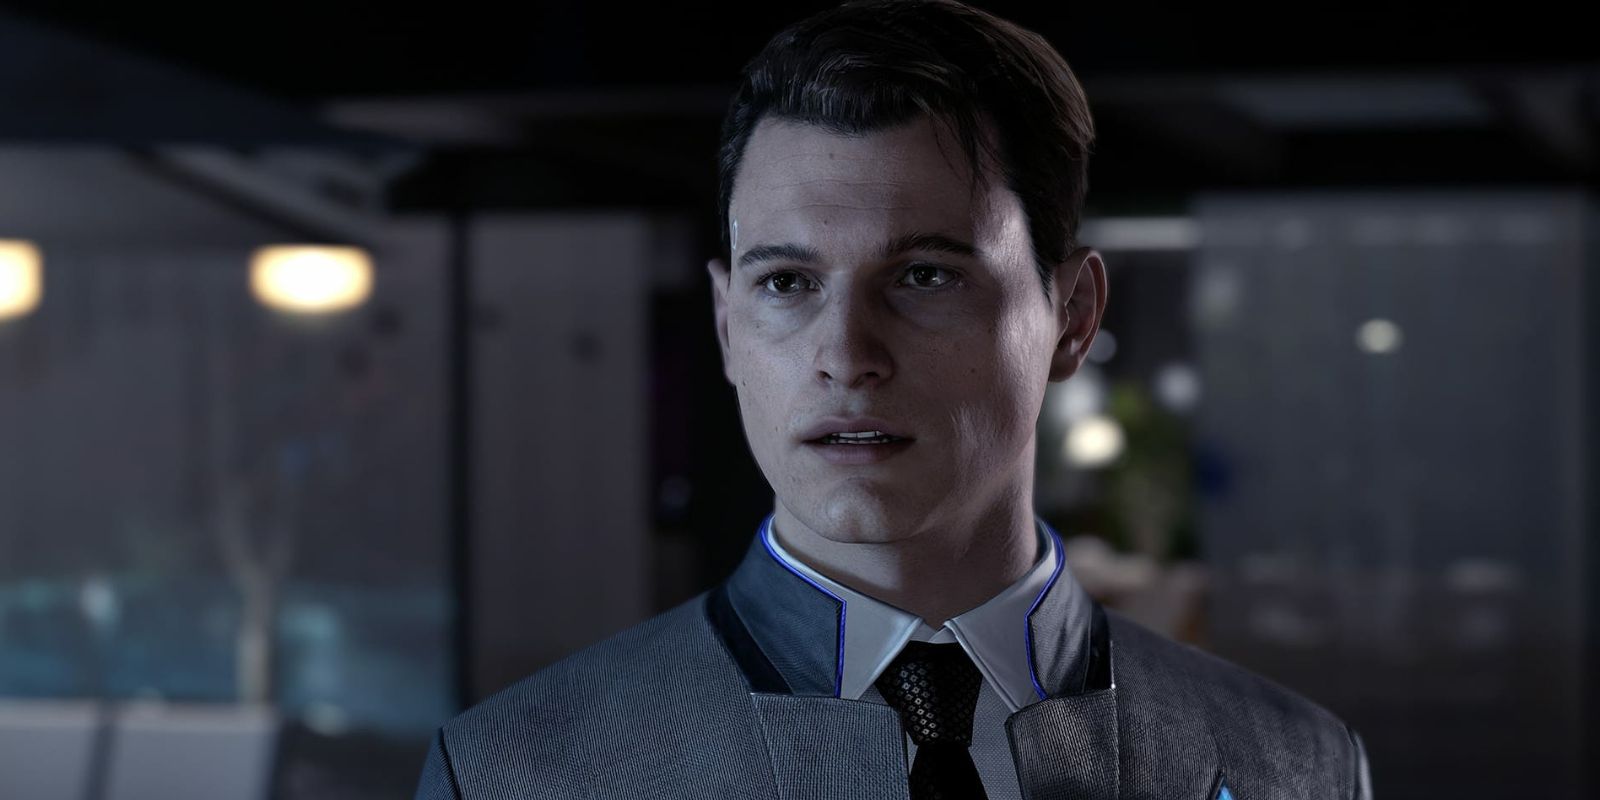 Connor is worried about Detroit Become Human